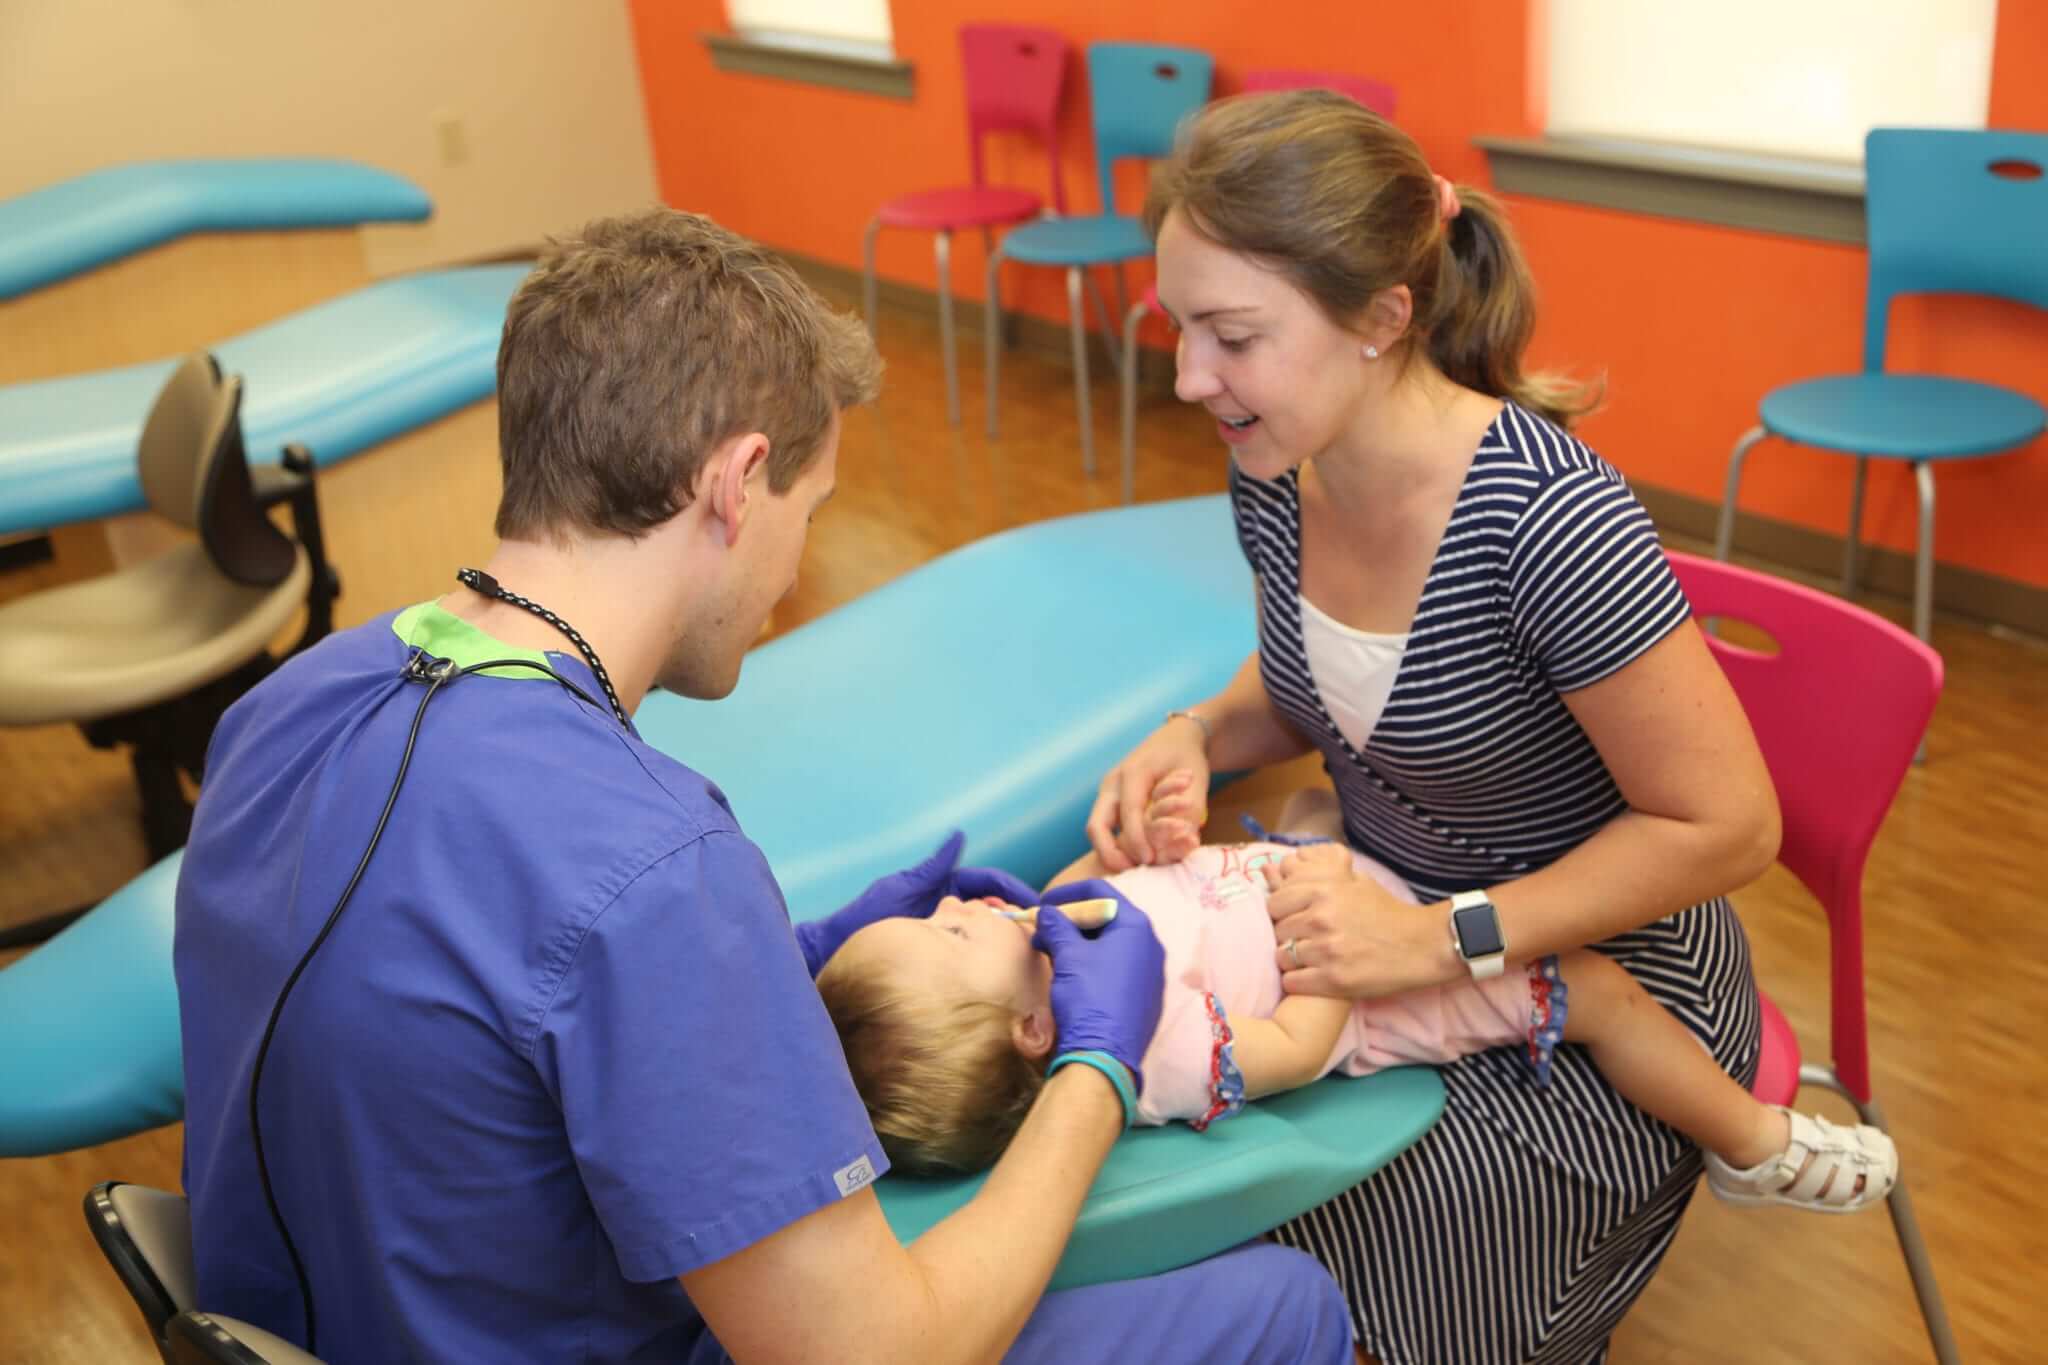 A dentist carrying out a knee-to-knee pediatric dental exam on a baby girl.